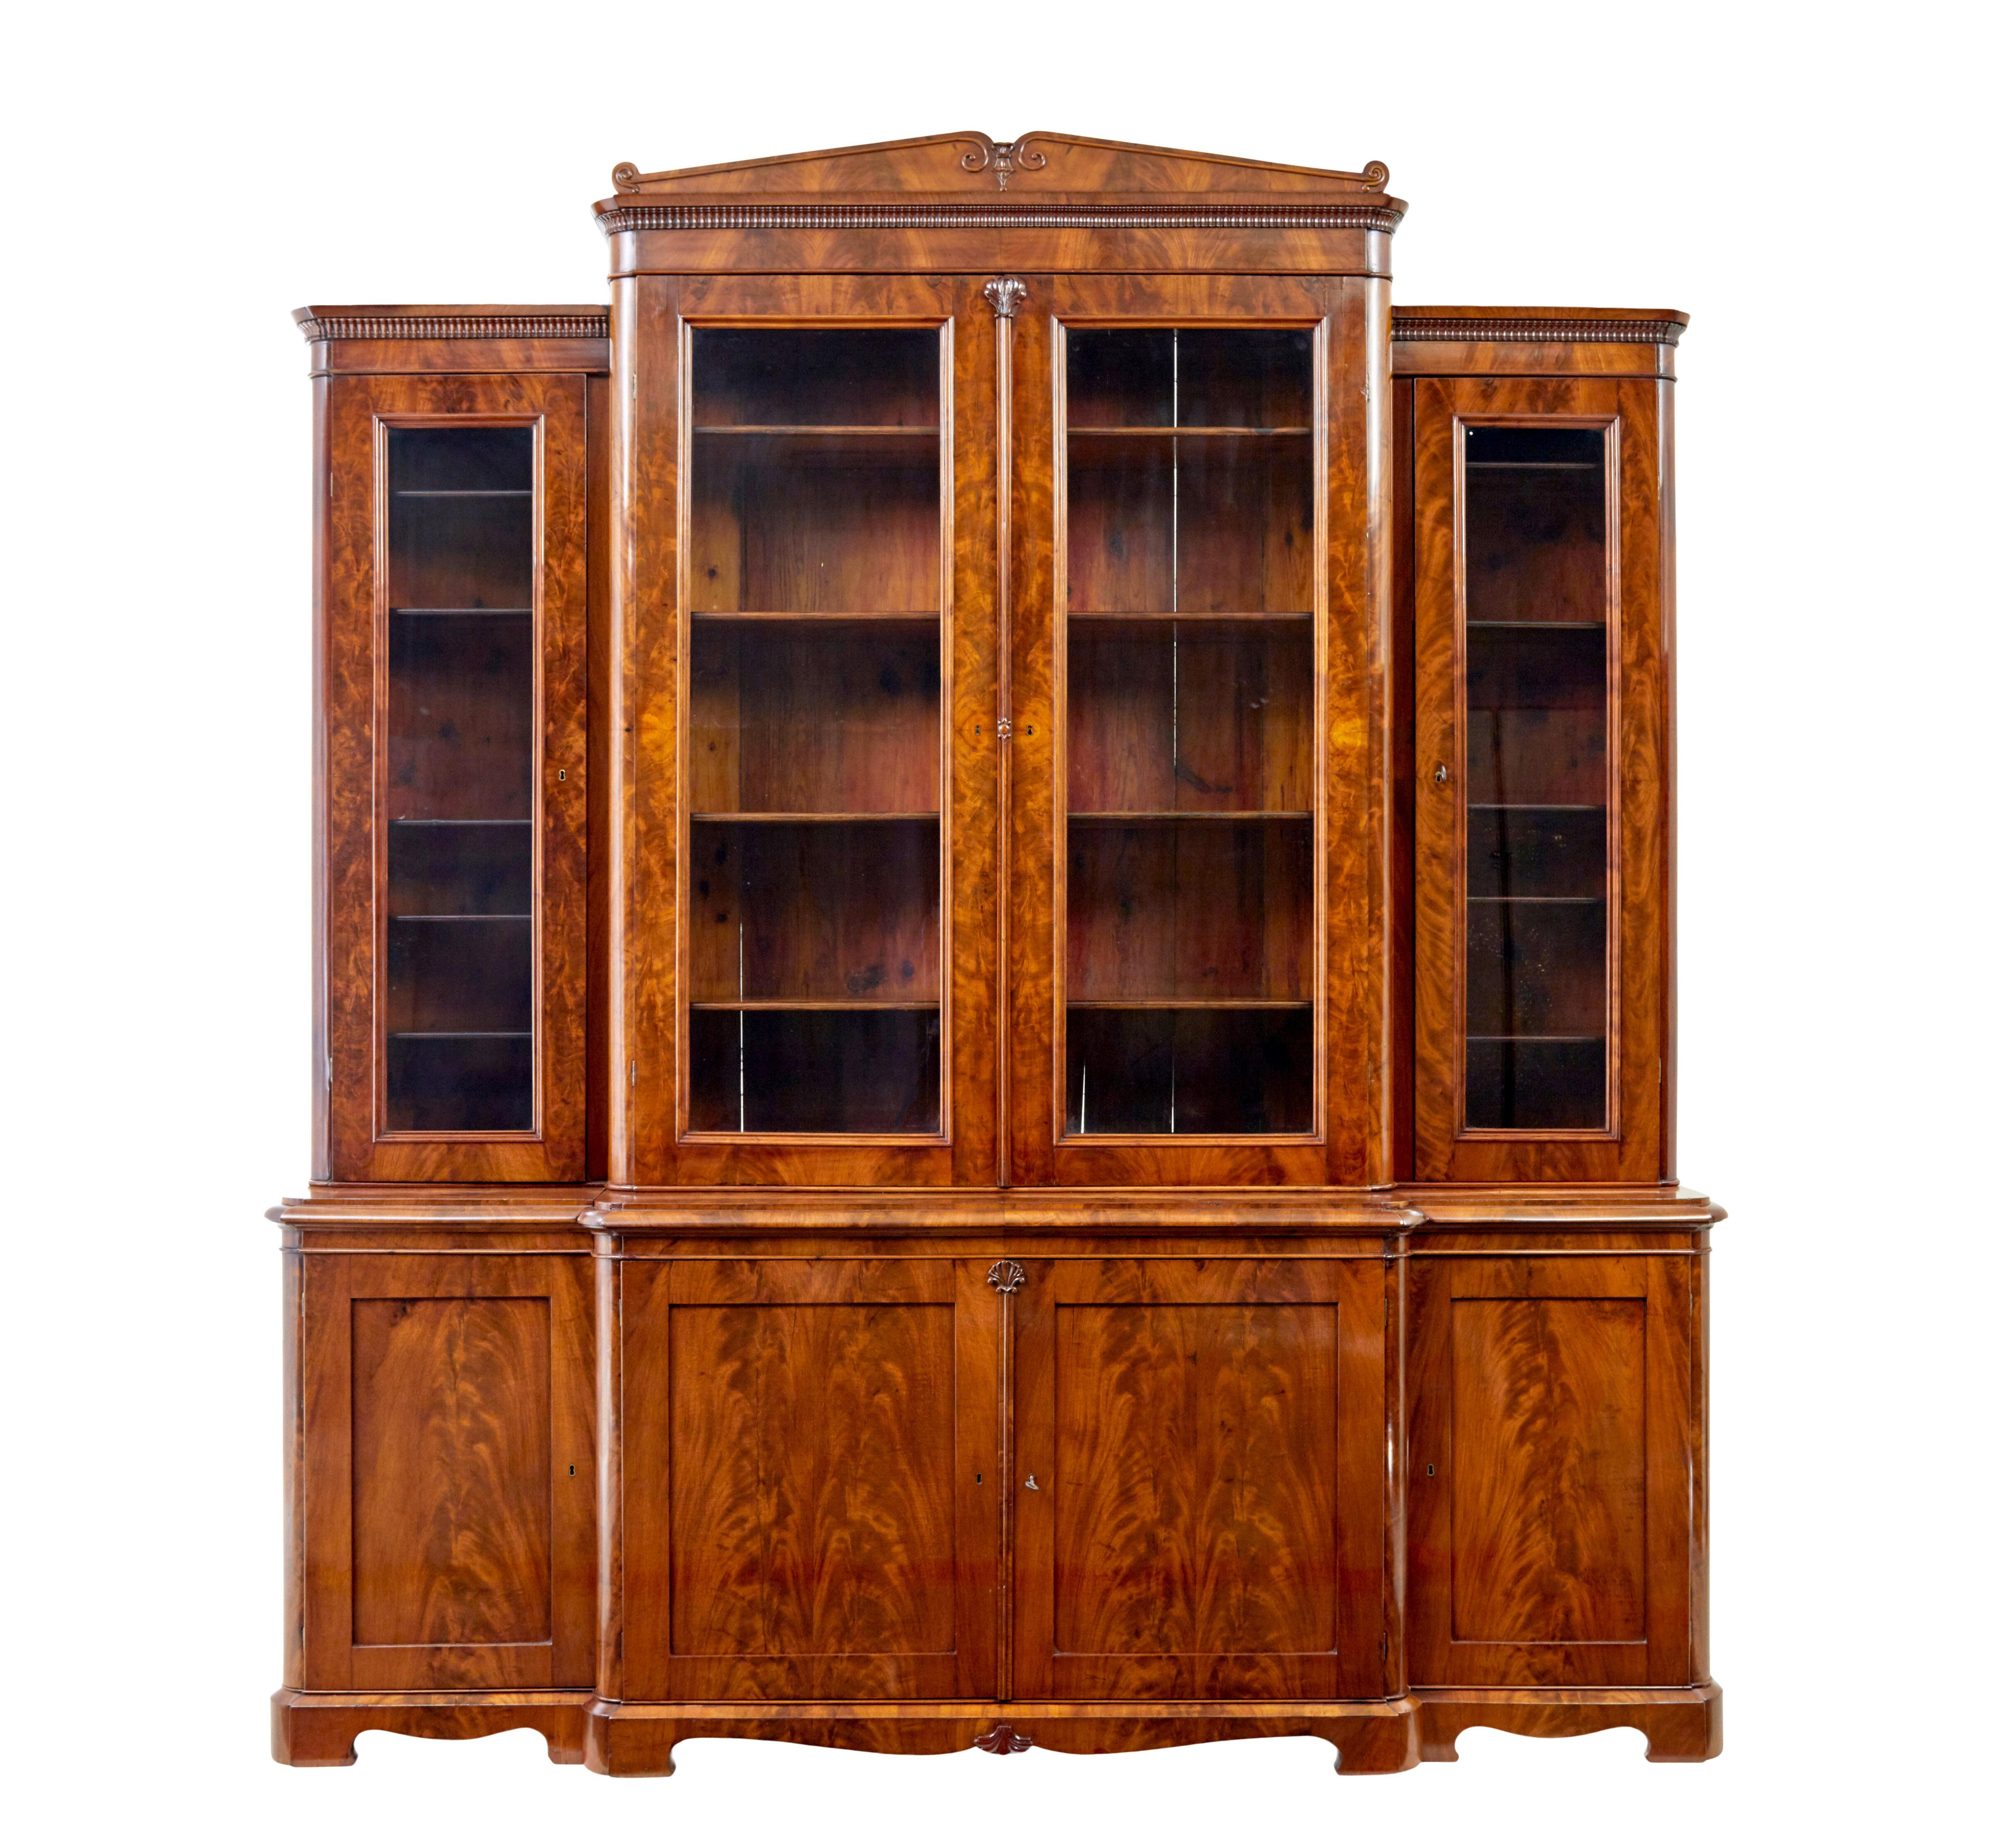 Early 19th century Scandinavian empire flame mahogany breakfront bookcase circa 1820.

Stunning bookcase of grand proportions veneered in golden flame mahogany.  Bookcase comprises of 7 sections which screw together to.  3 sections to the base, 3